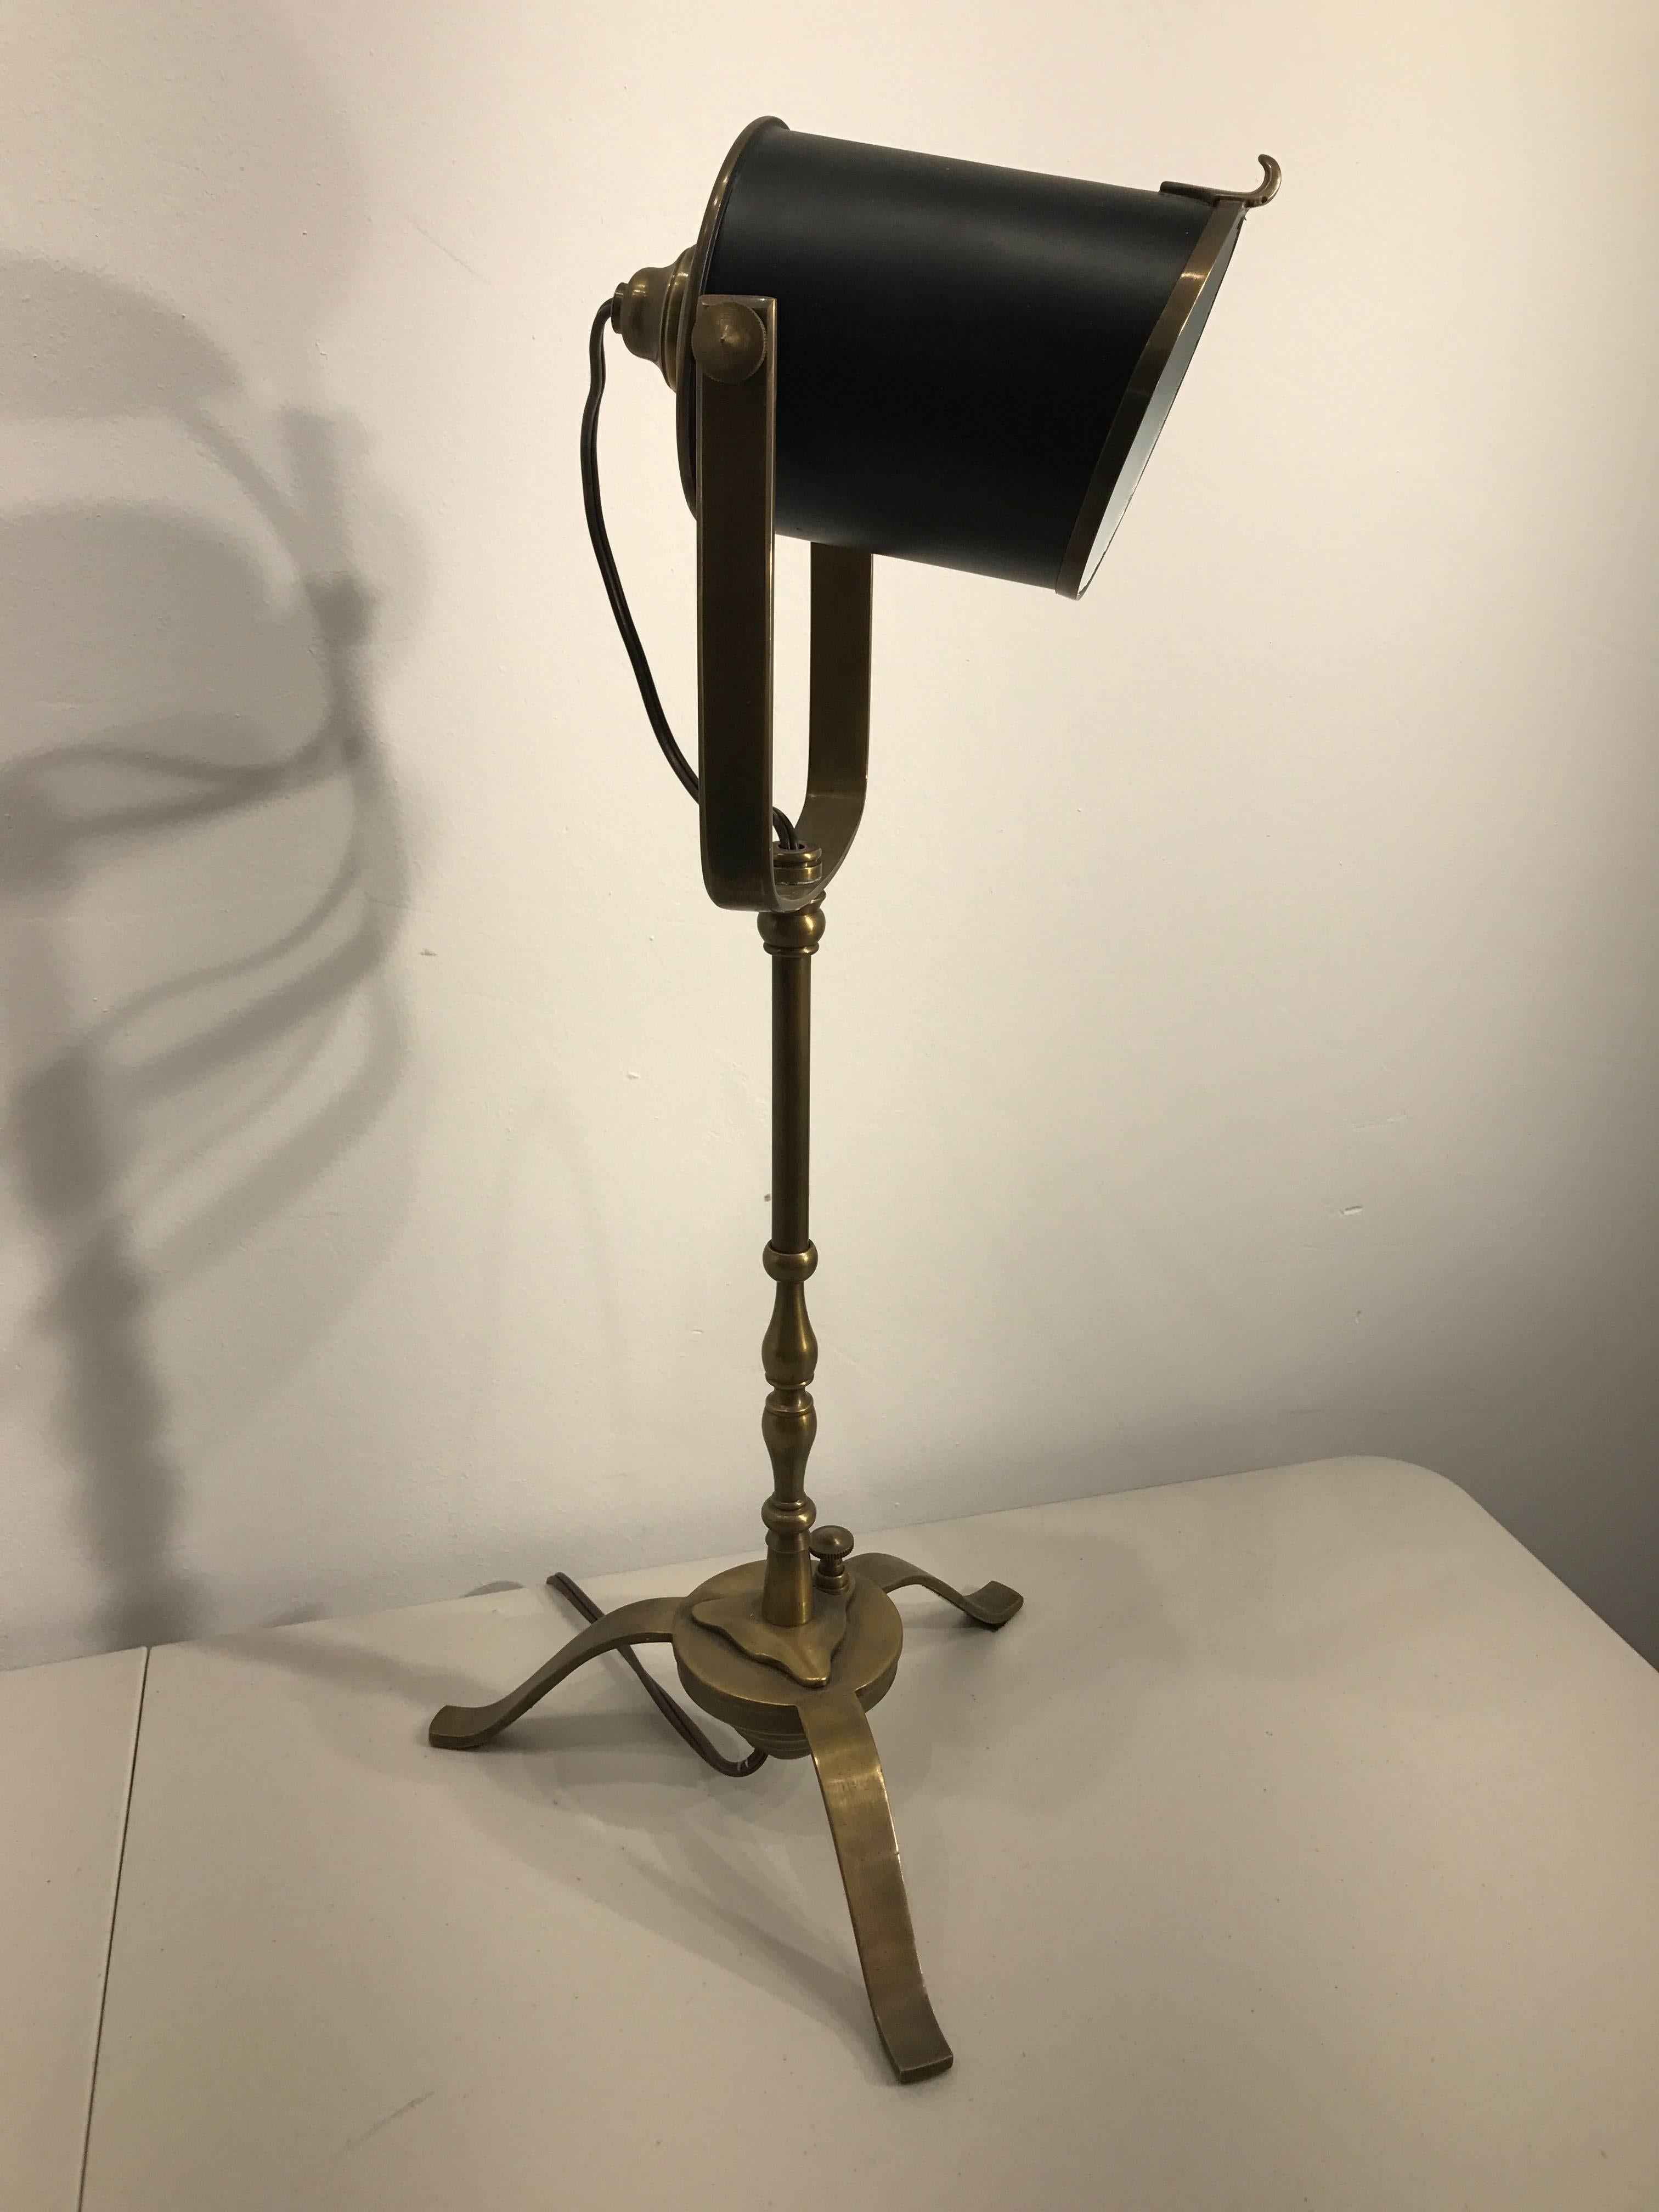 Miniature Directors lamp, as a table lamp, nicely made and detailed with enameled shade and brass stand. The shade measures 5